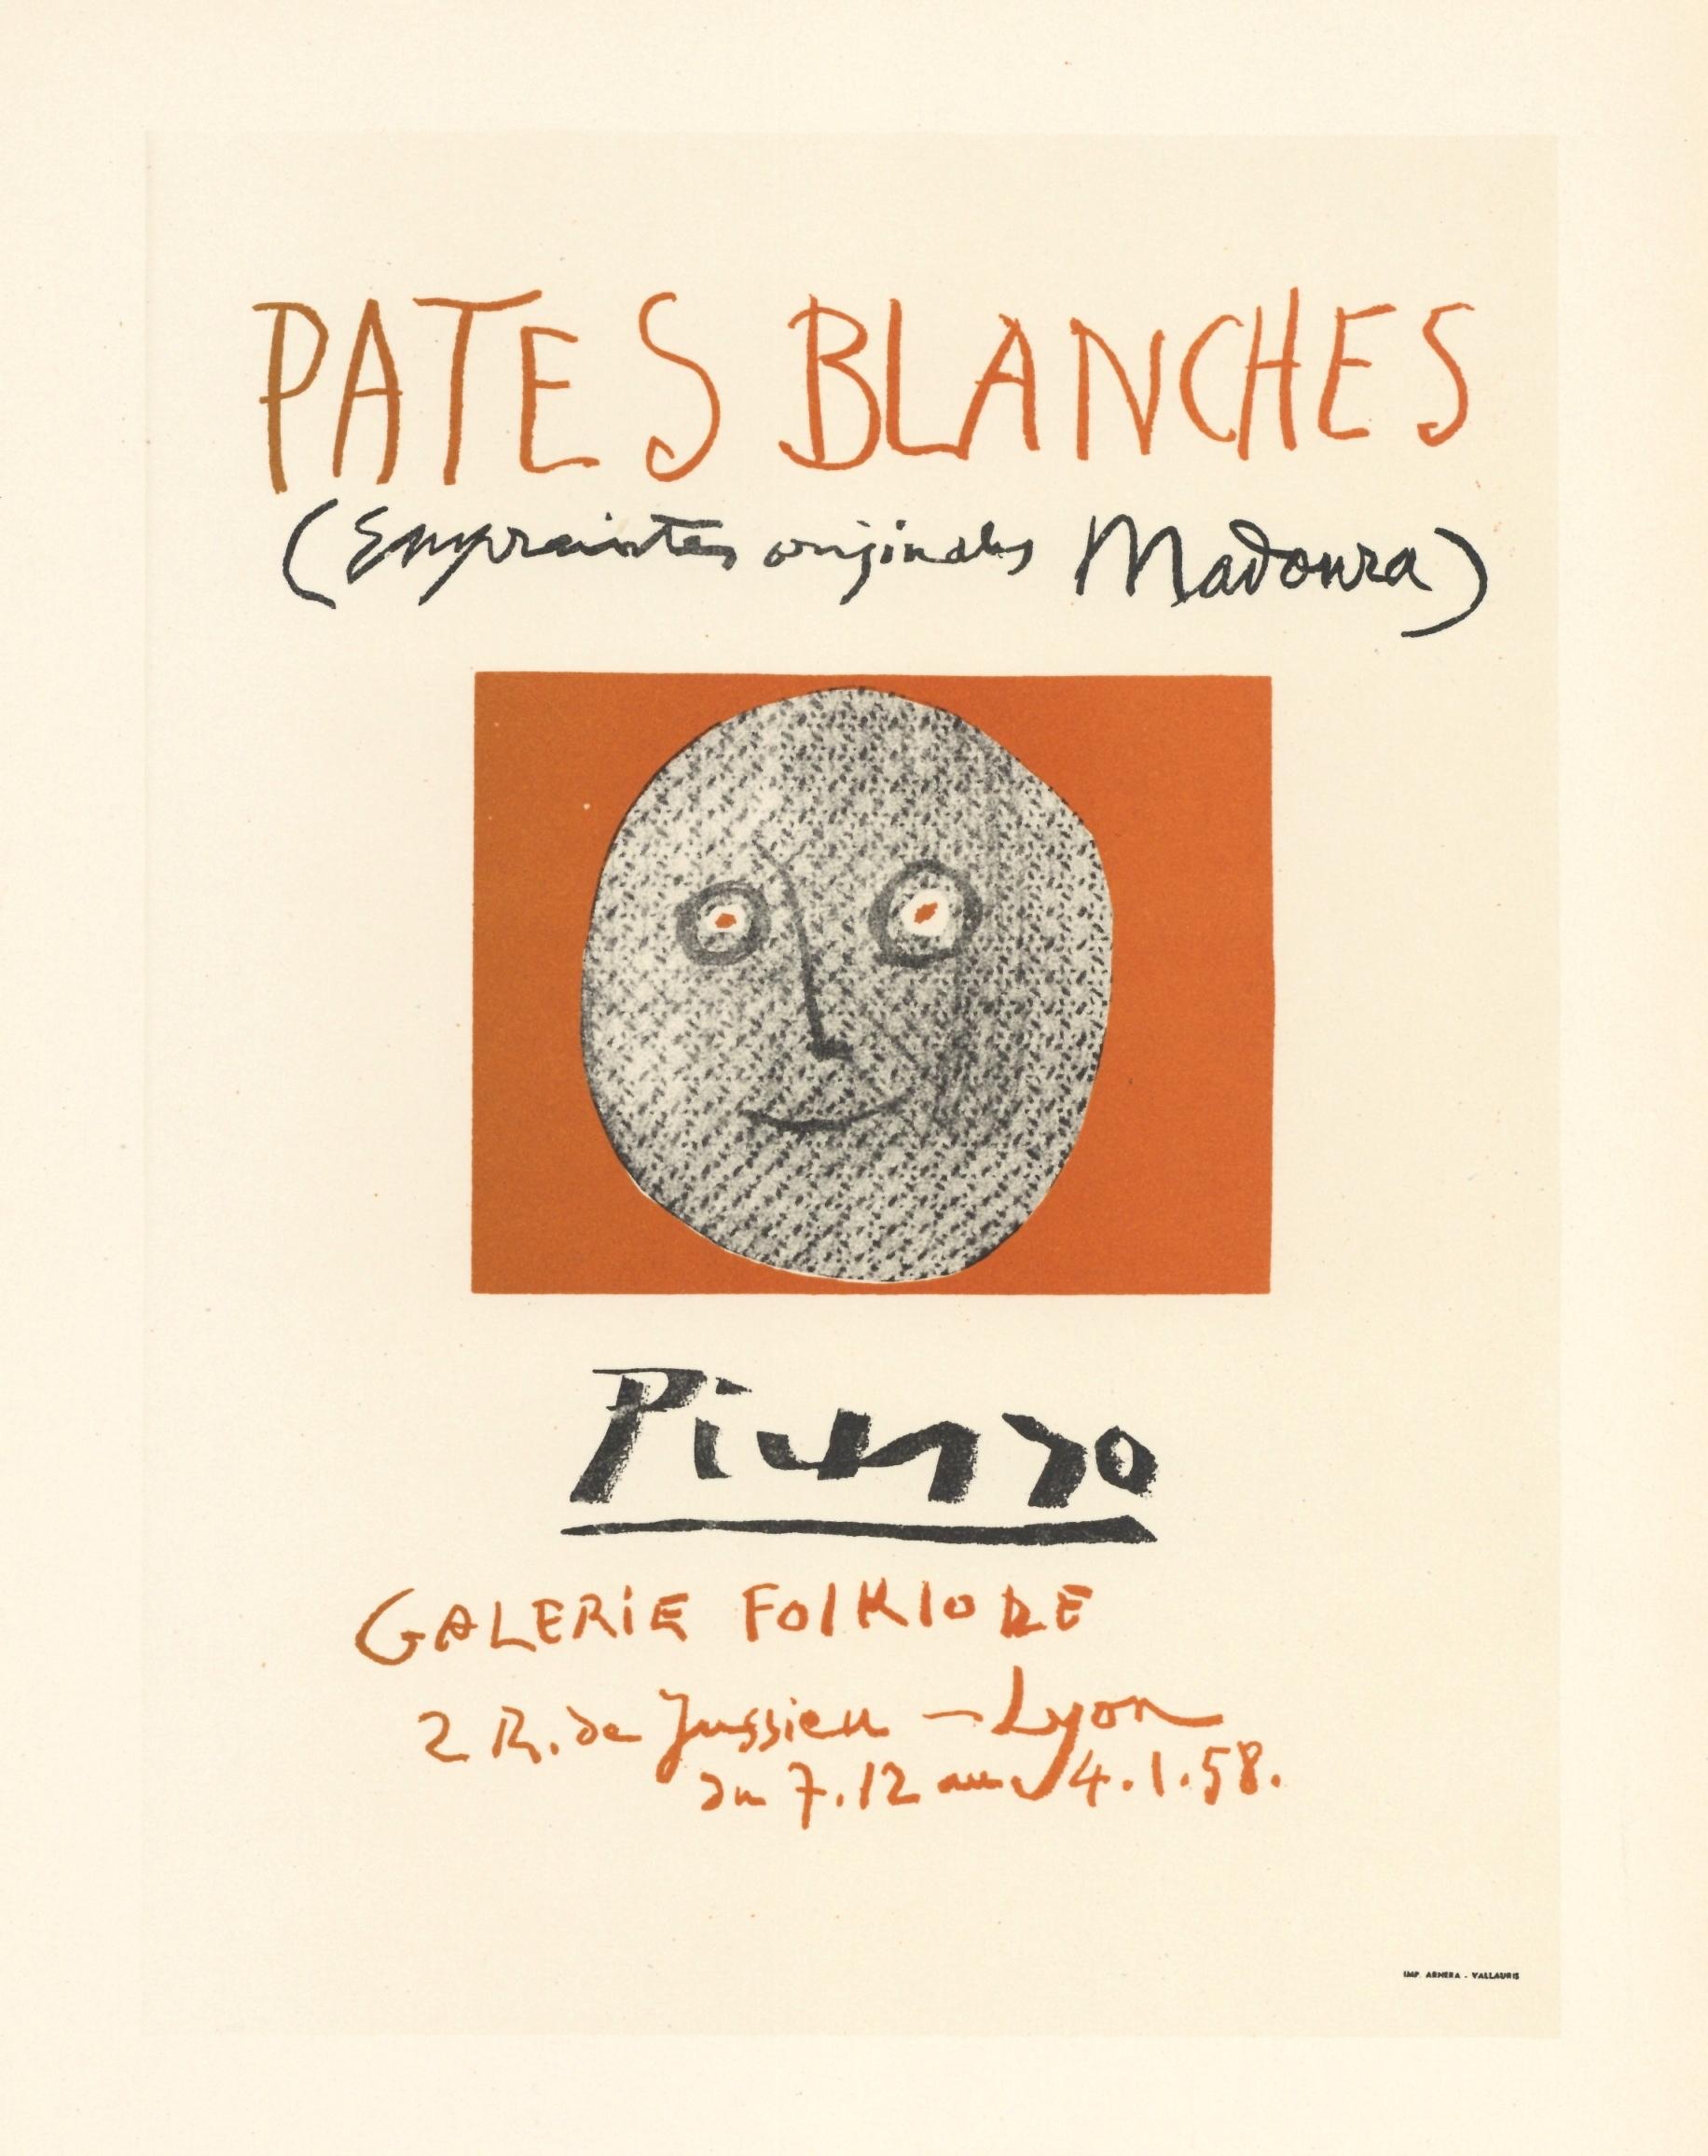 "Pates Blanches" lithograph poster - Print by (after) Pablo Picasso